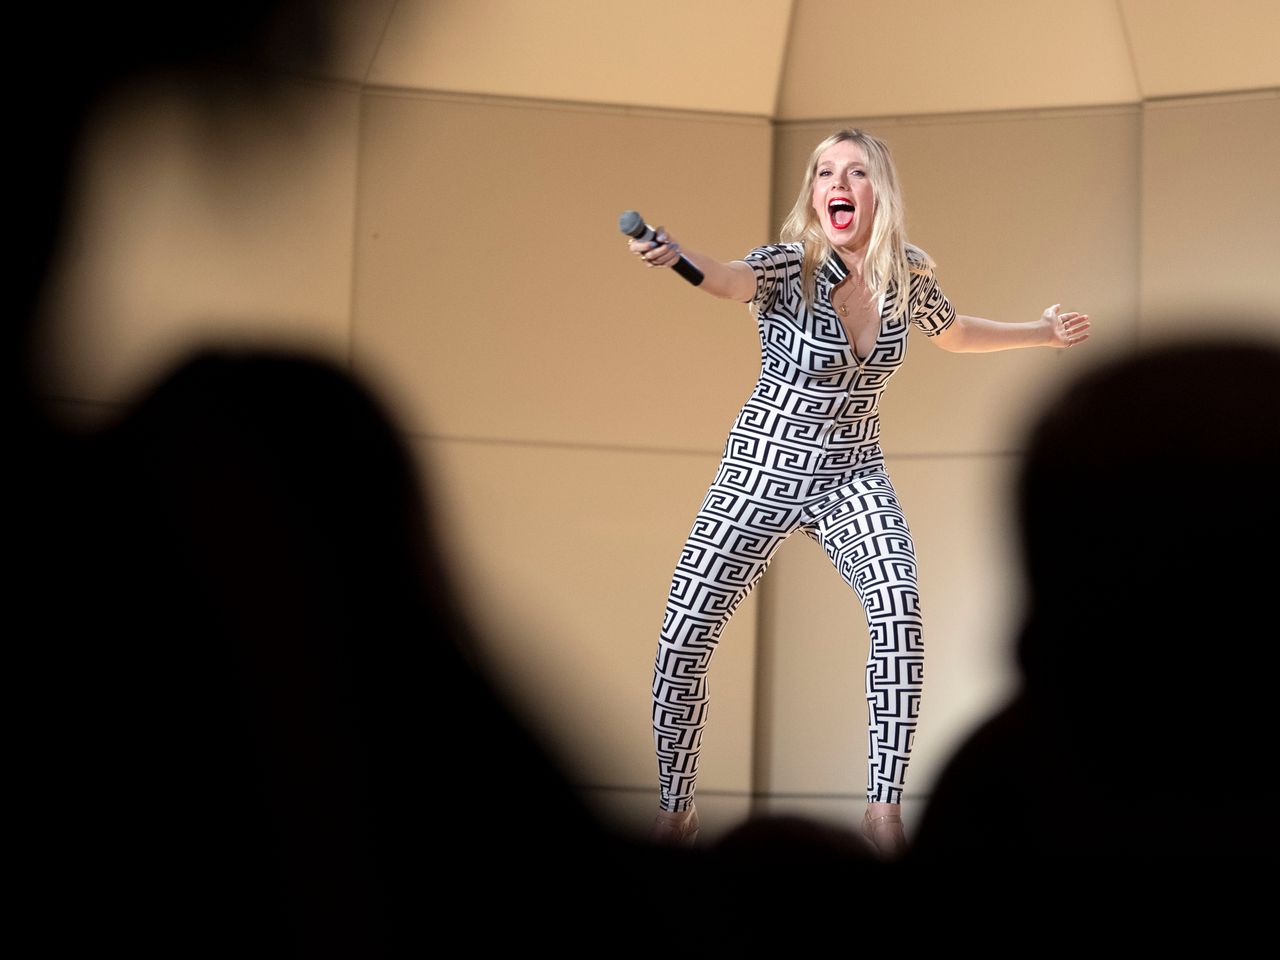 A blonde woman stands on stage in a black and white greco patterned body suit. She has her hand outstretched pointing a microphone towards the crowd. 